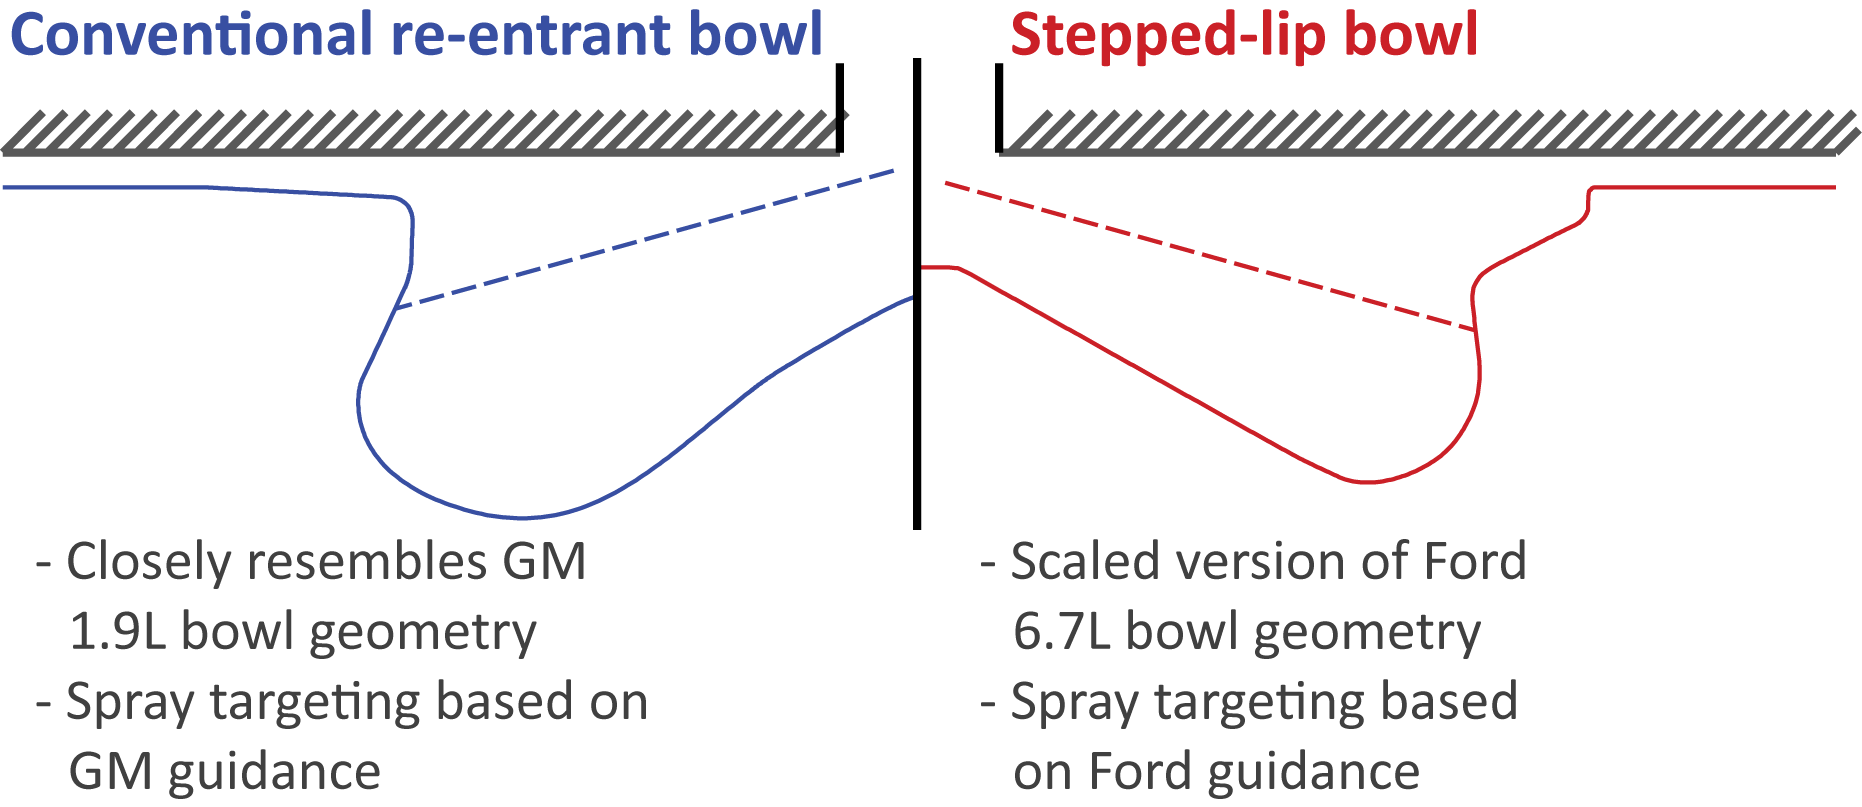 Comparison of conventional, re-entrant piston bowl with stepped-lip bowl.